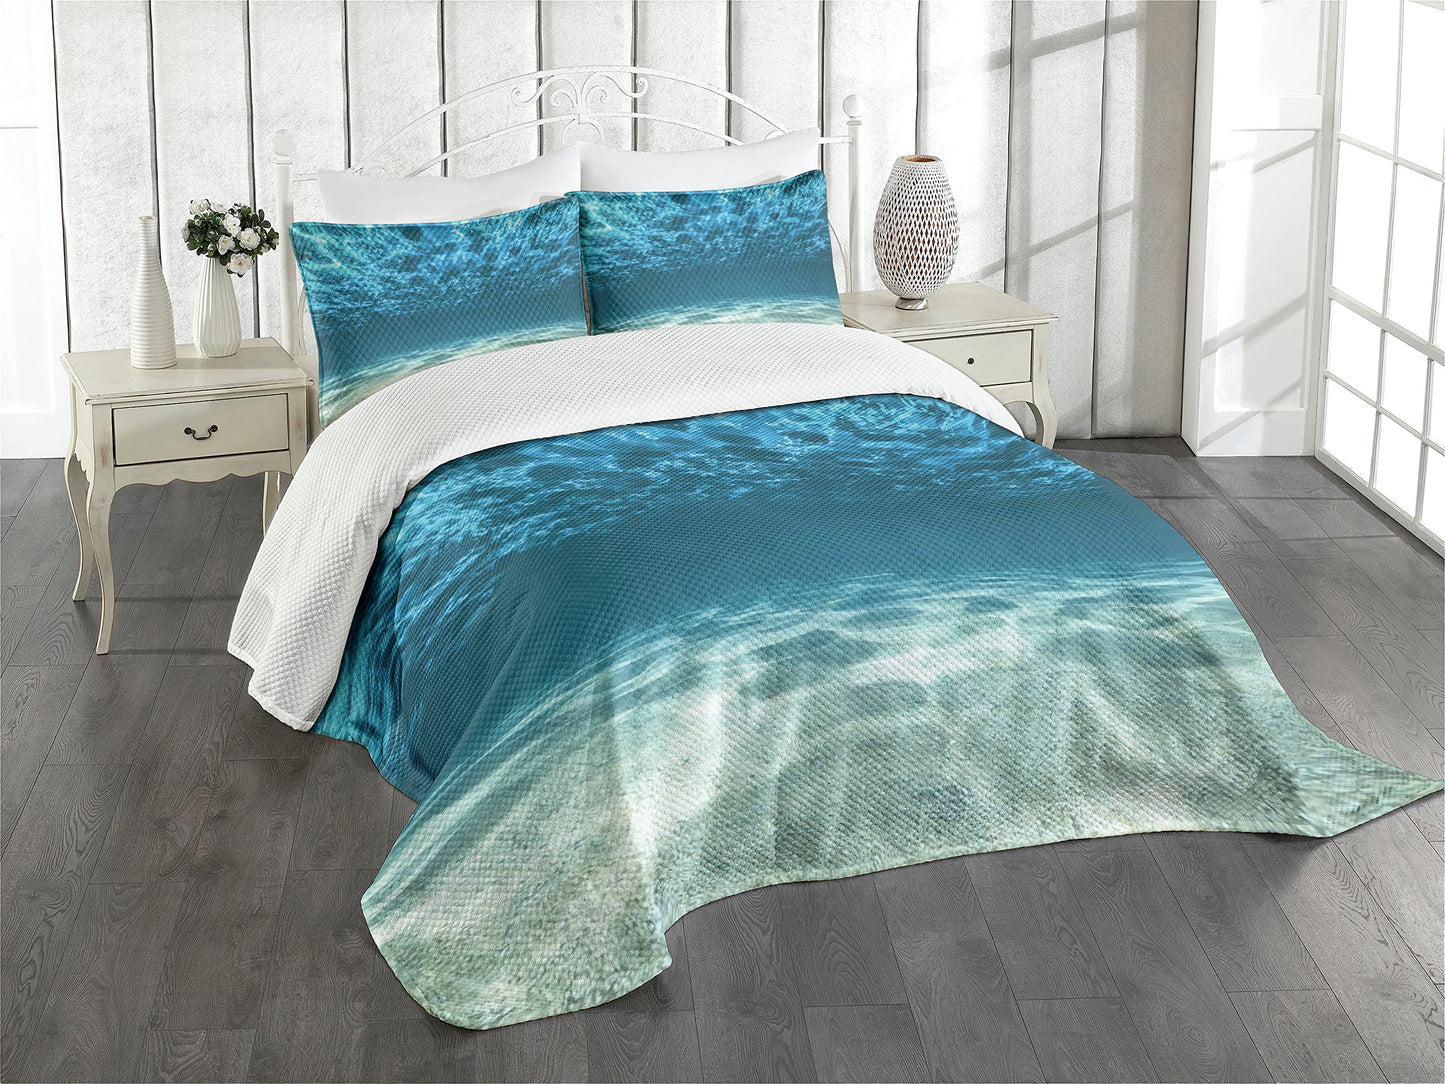 Lunarable Ocean Bedspread, Gravelly Bottom Wavy Surface Tropical Seascape Abyss Underwater Sunny Day Image, Decorative Quilted 3 Piece Coverlet Set with 2 Pillow Shams, Queen Size, Ivory Blue